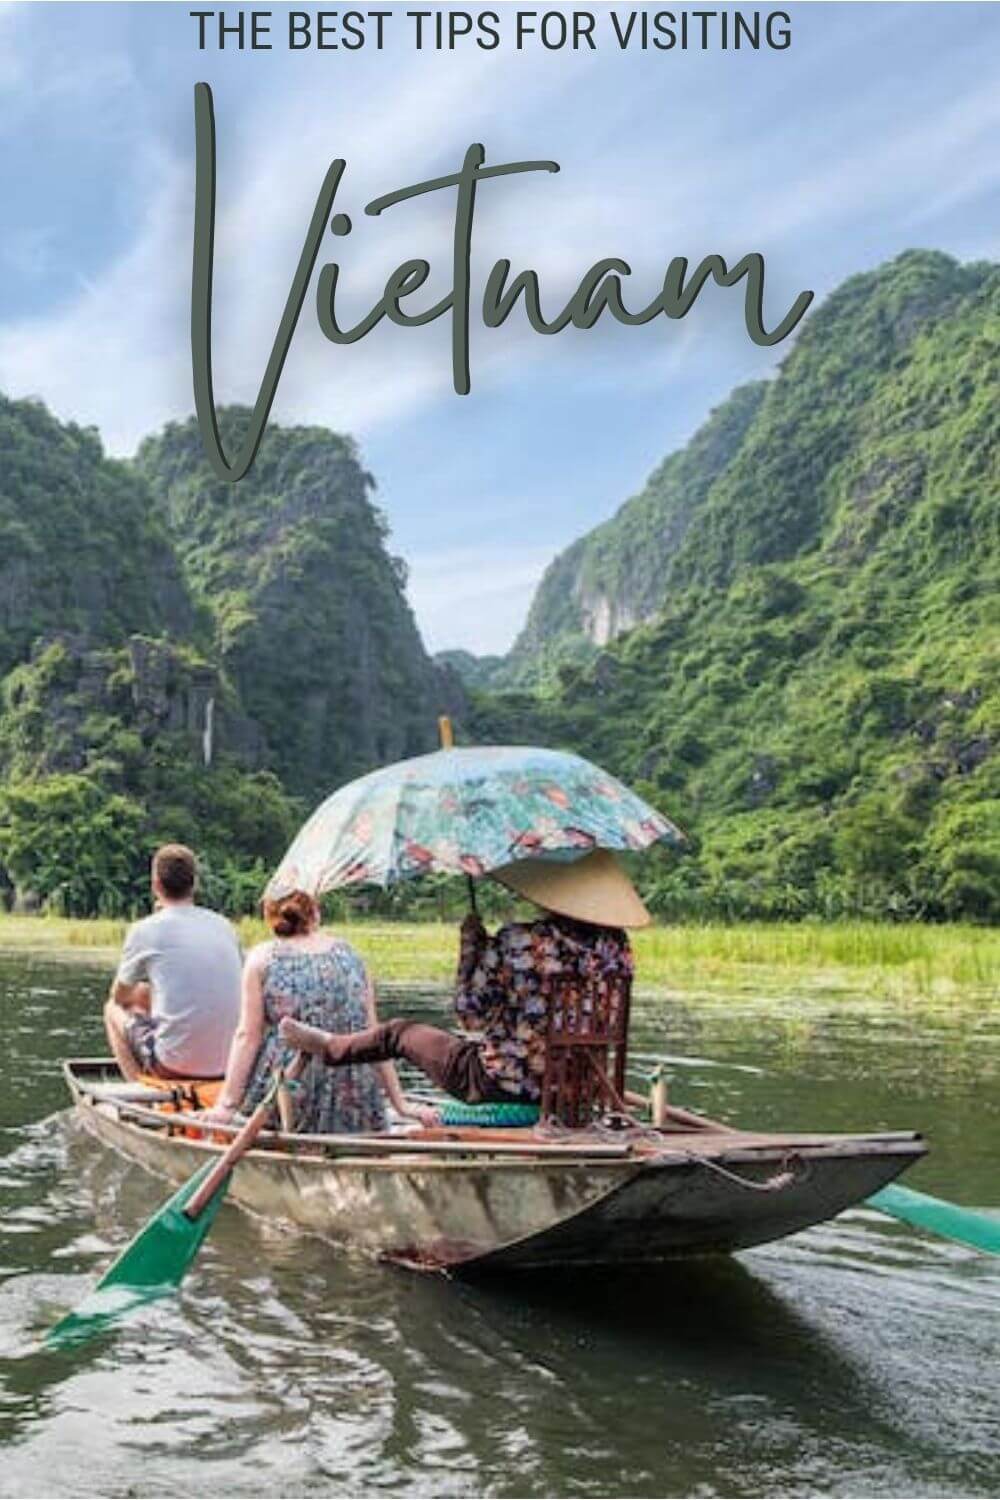 10 Quick Vietnam Travel Tips for First-time Visitors